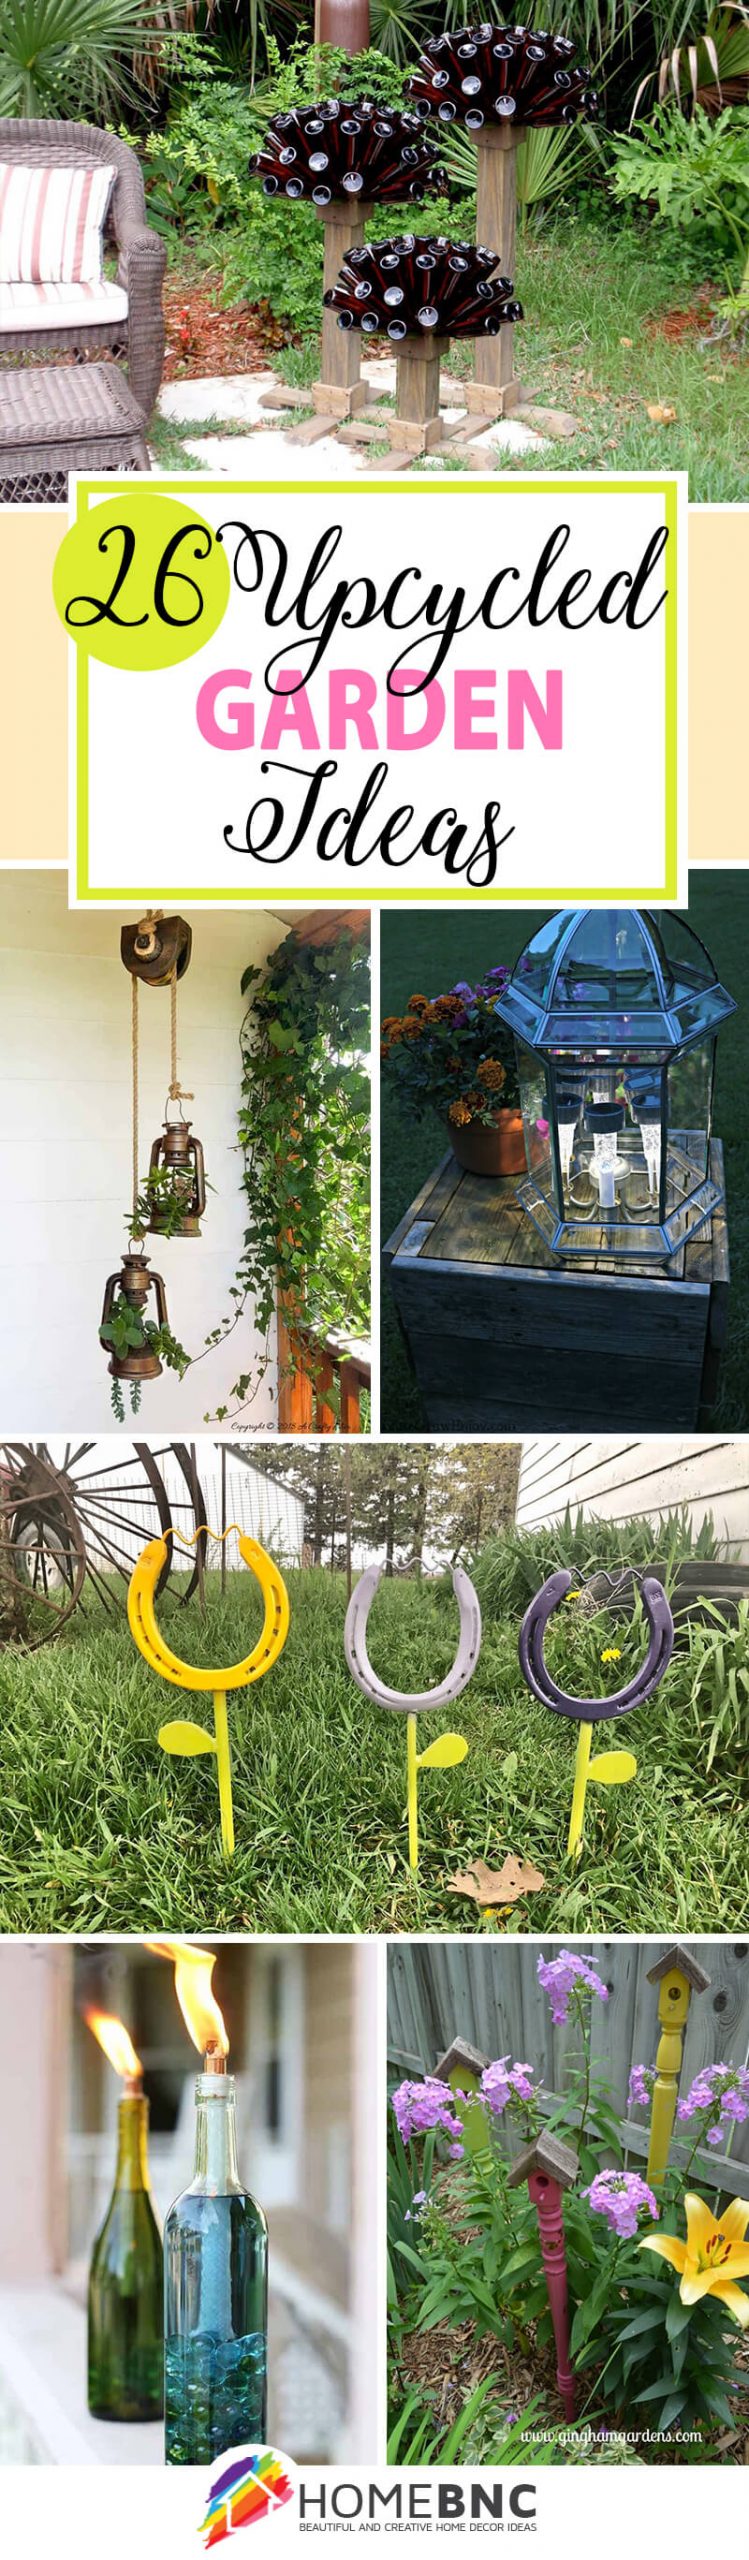 18 Best Upcycled Garden Ideas to Dress Up Your Outdoor Space in 18